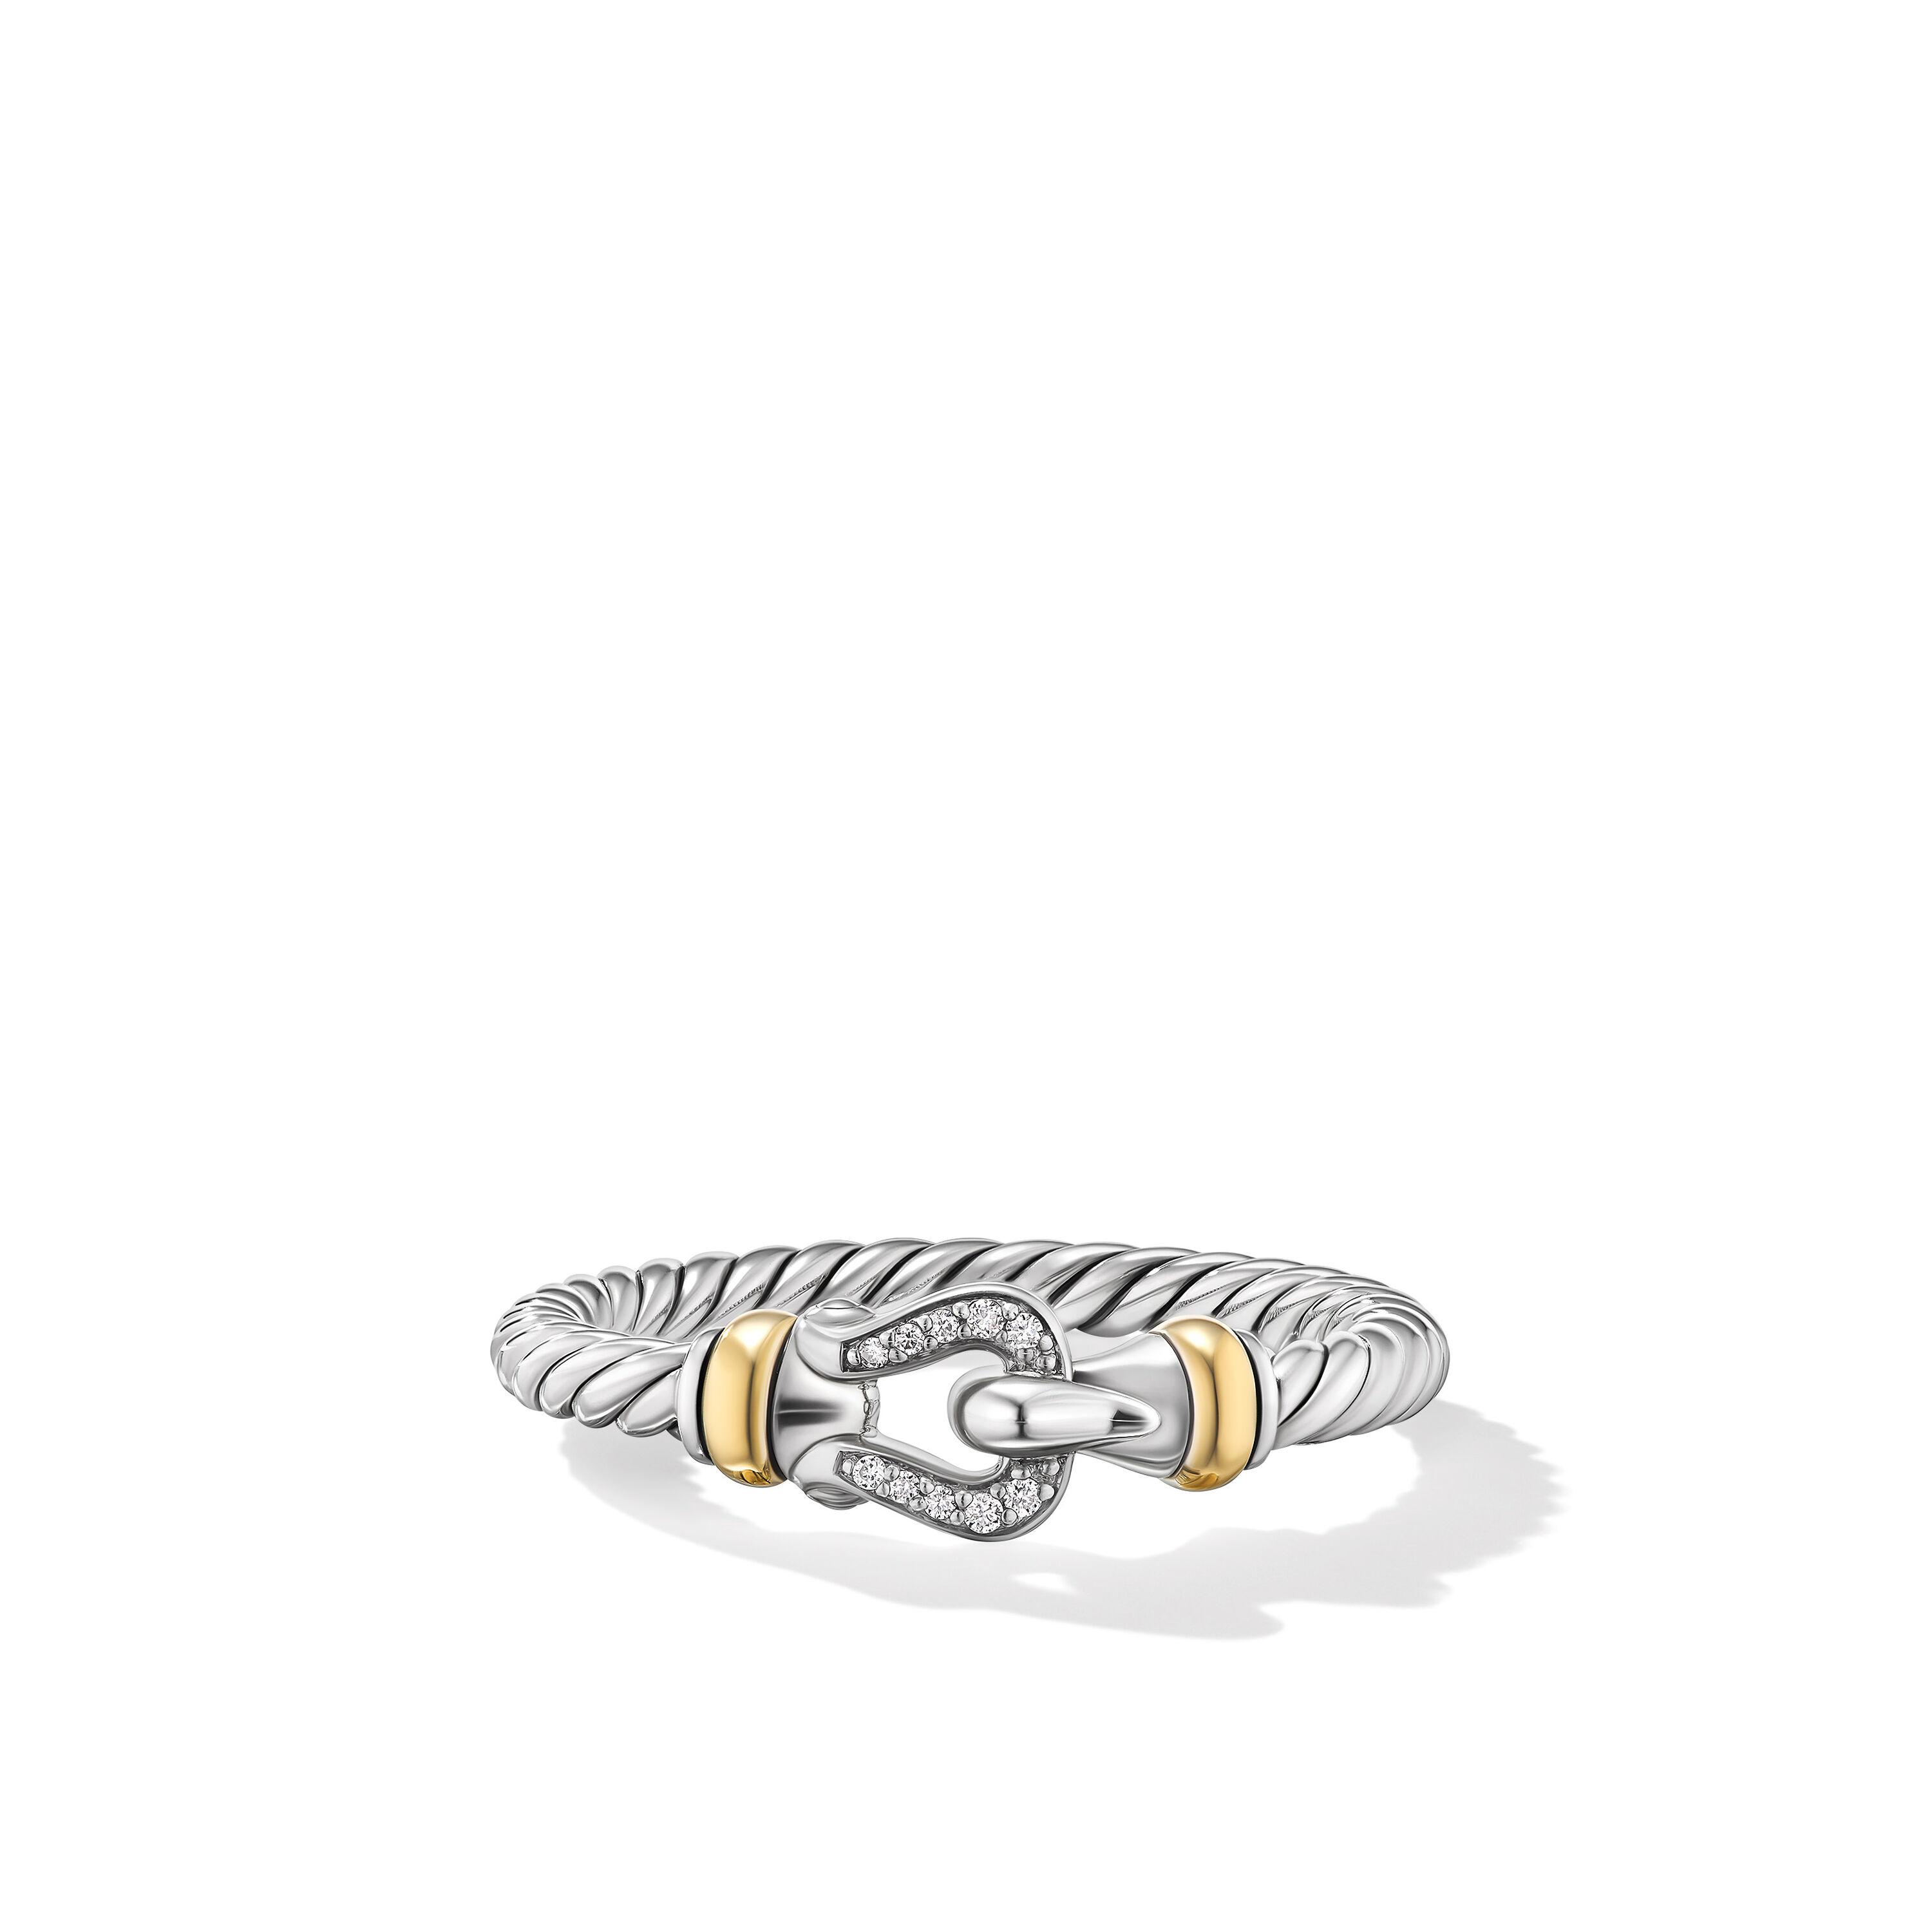 David Yurman Sterling Silver Petite Buckle Ring with 18k Yellow Gold and Diamonds, Size 6 0